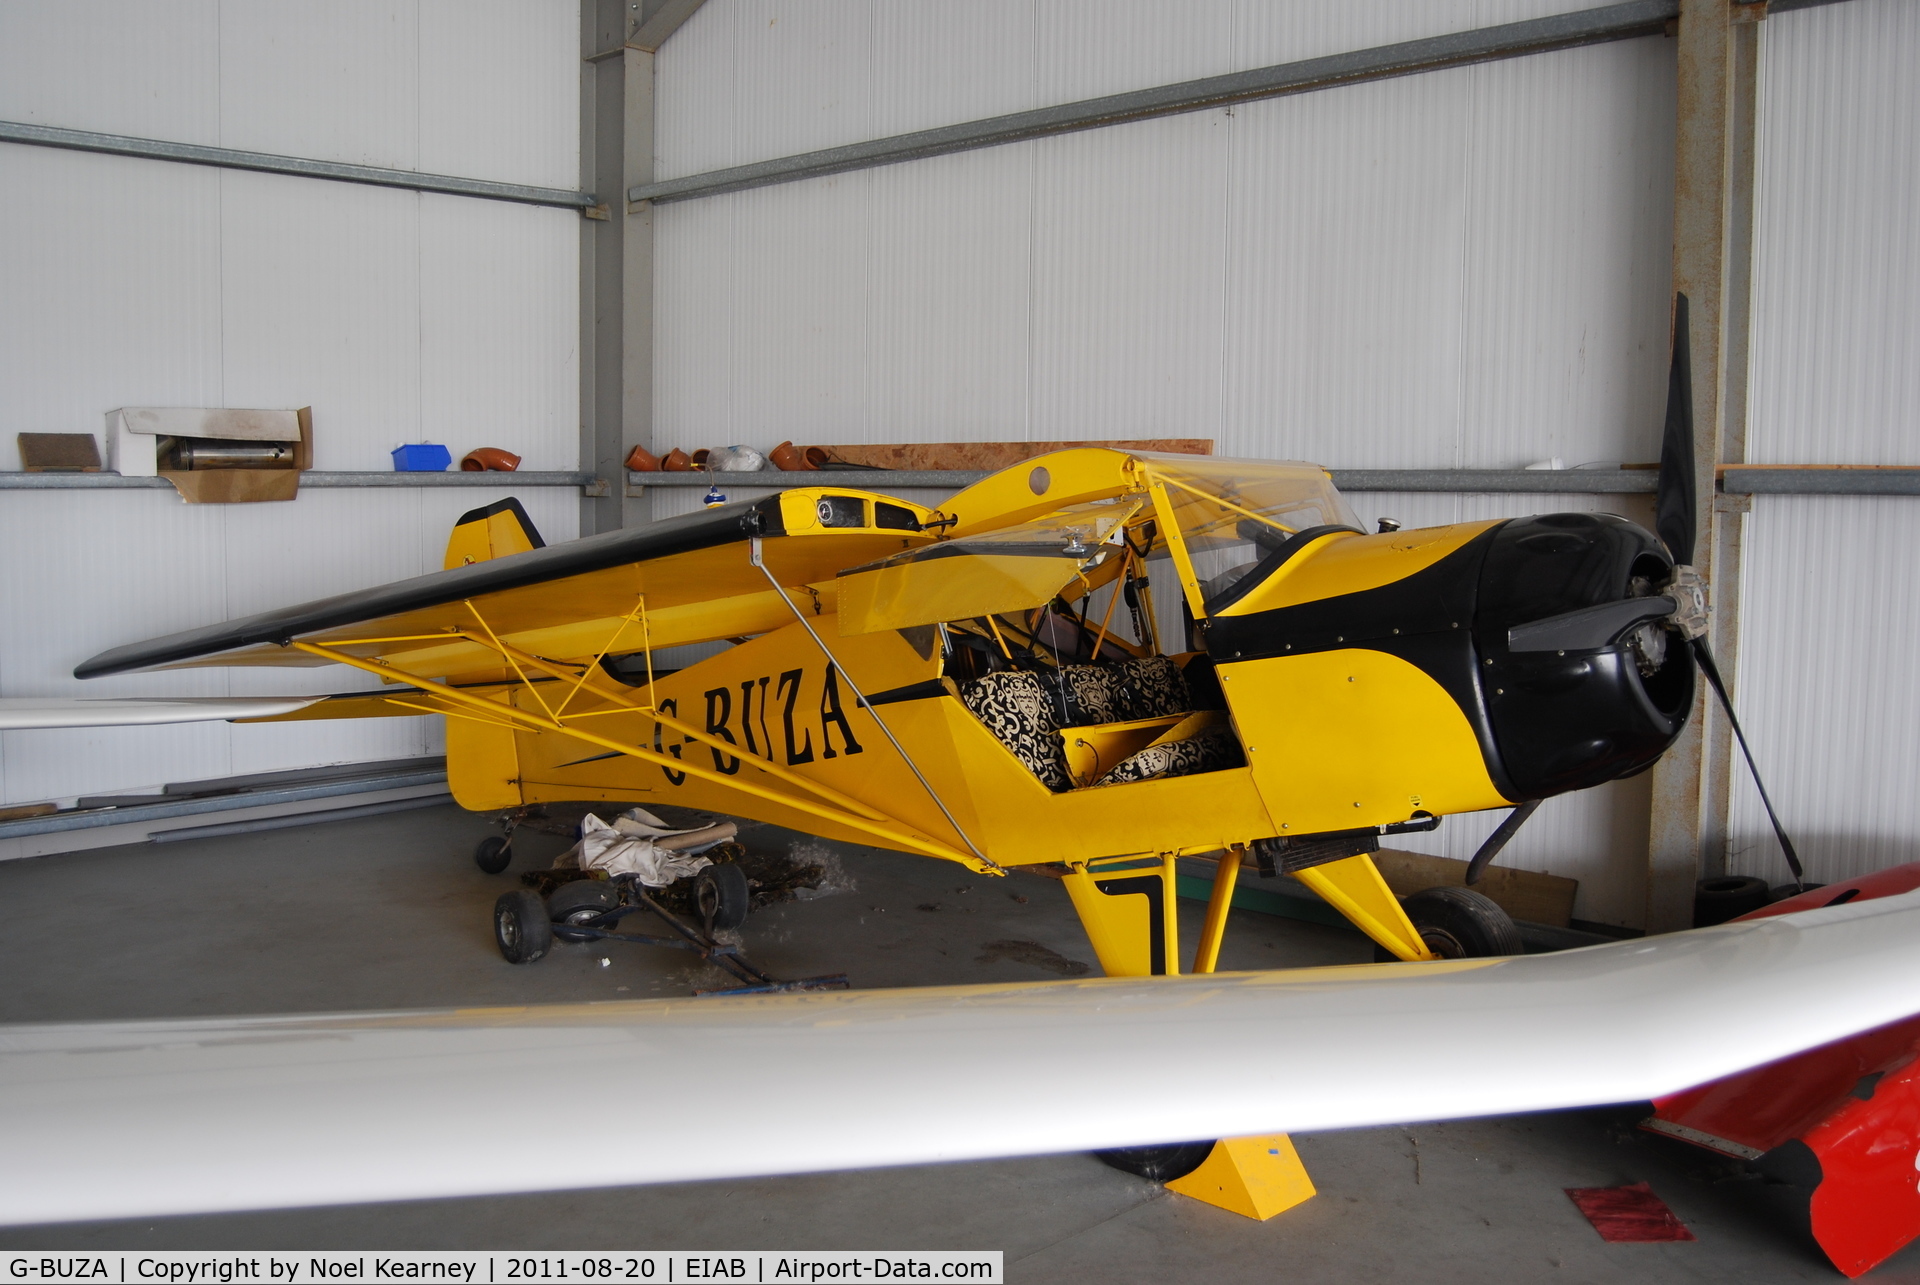 G-BUZA, 1998 Denney Kitfox Mk3 C/N PFA 172-12547, Stored at the back of the hanger at Abbeyshrule, in need of some TLC.